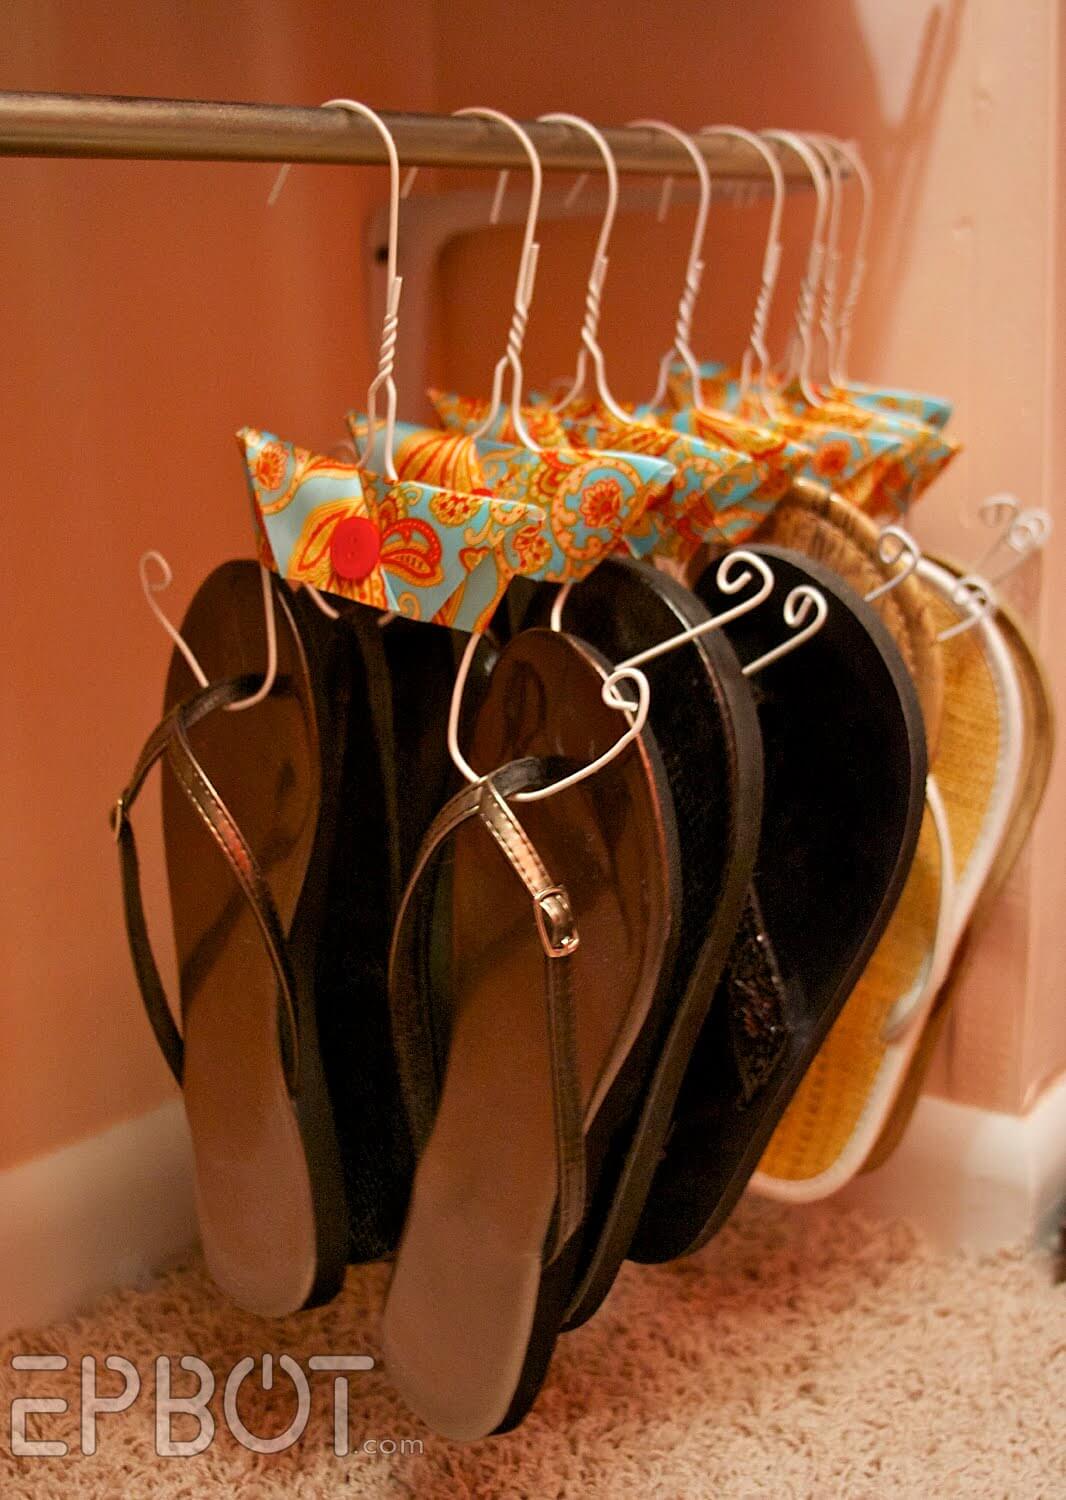 Entryway Storage Solution for Sandals